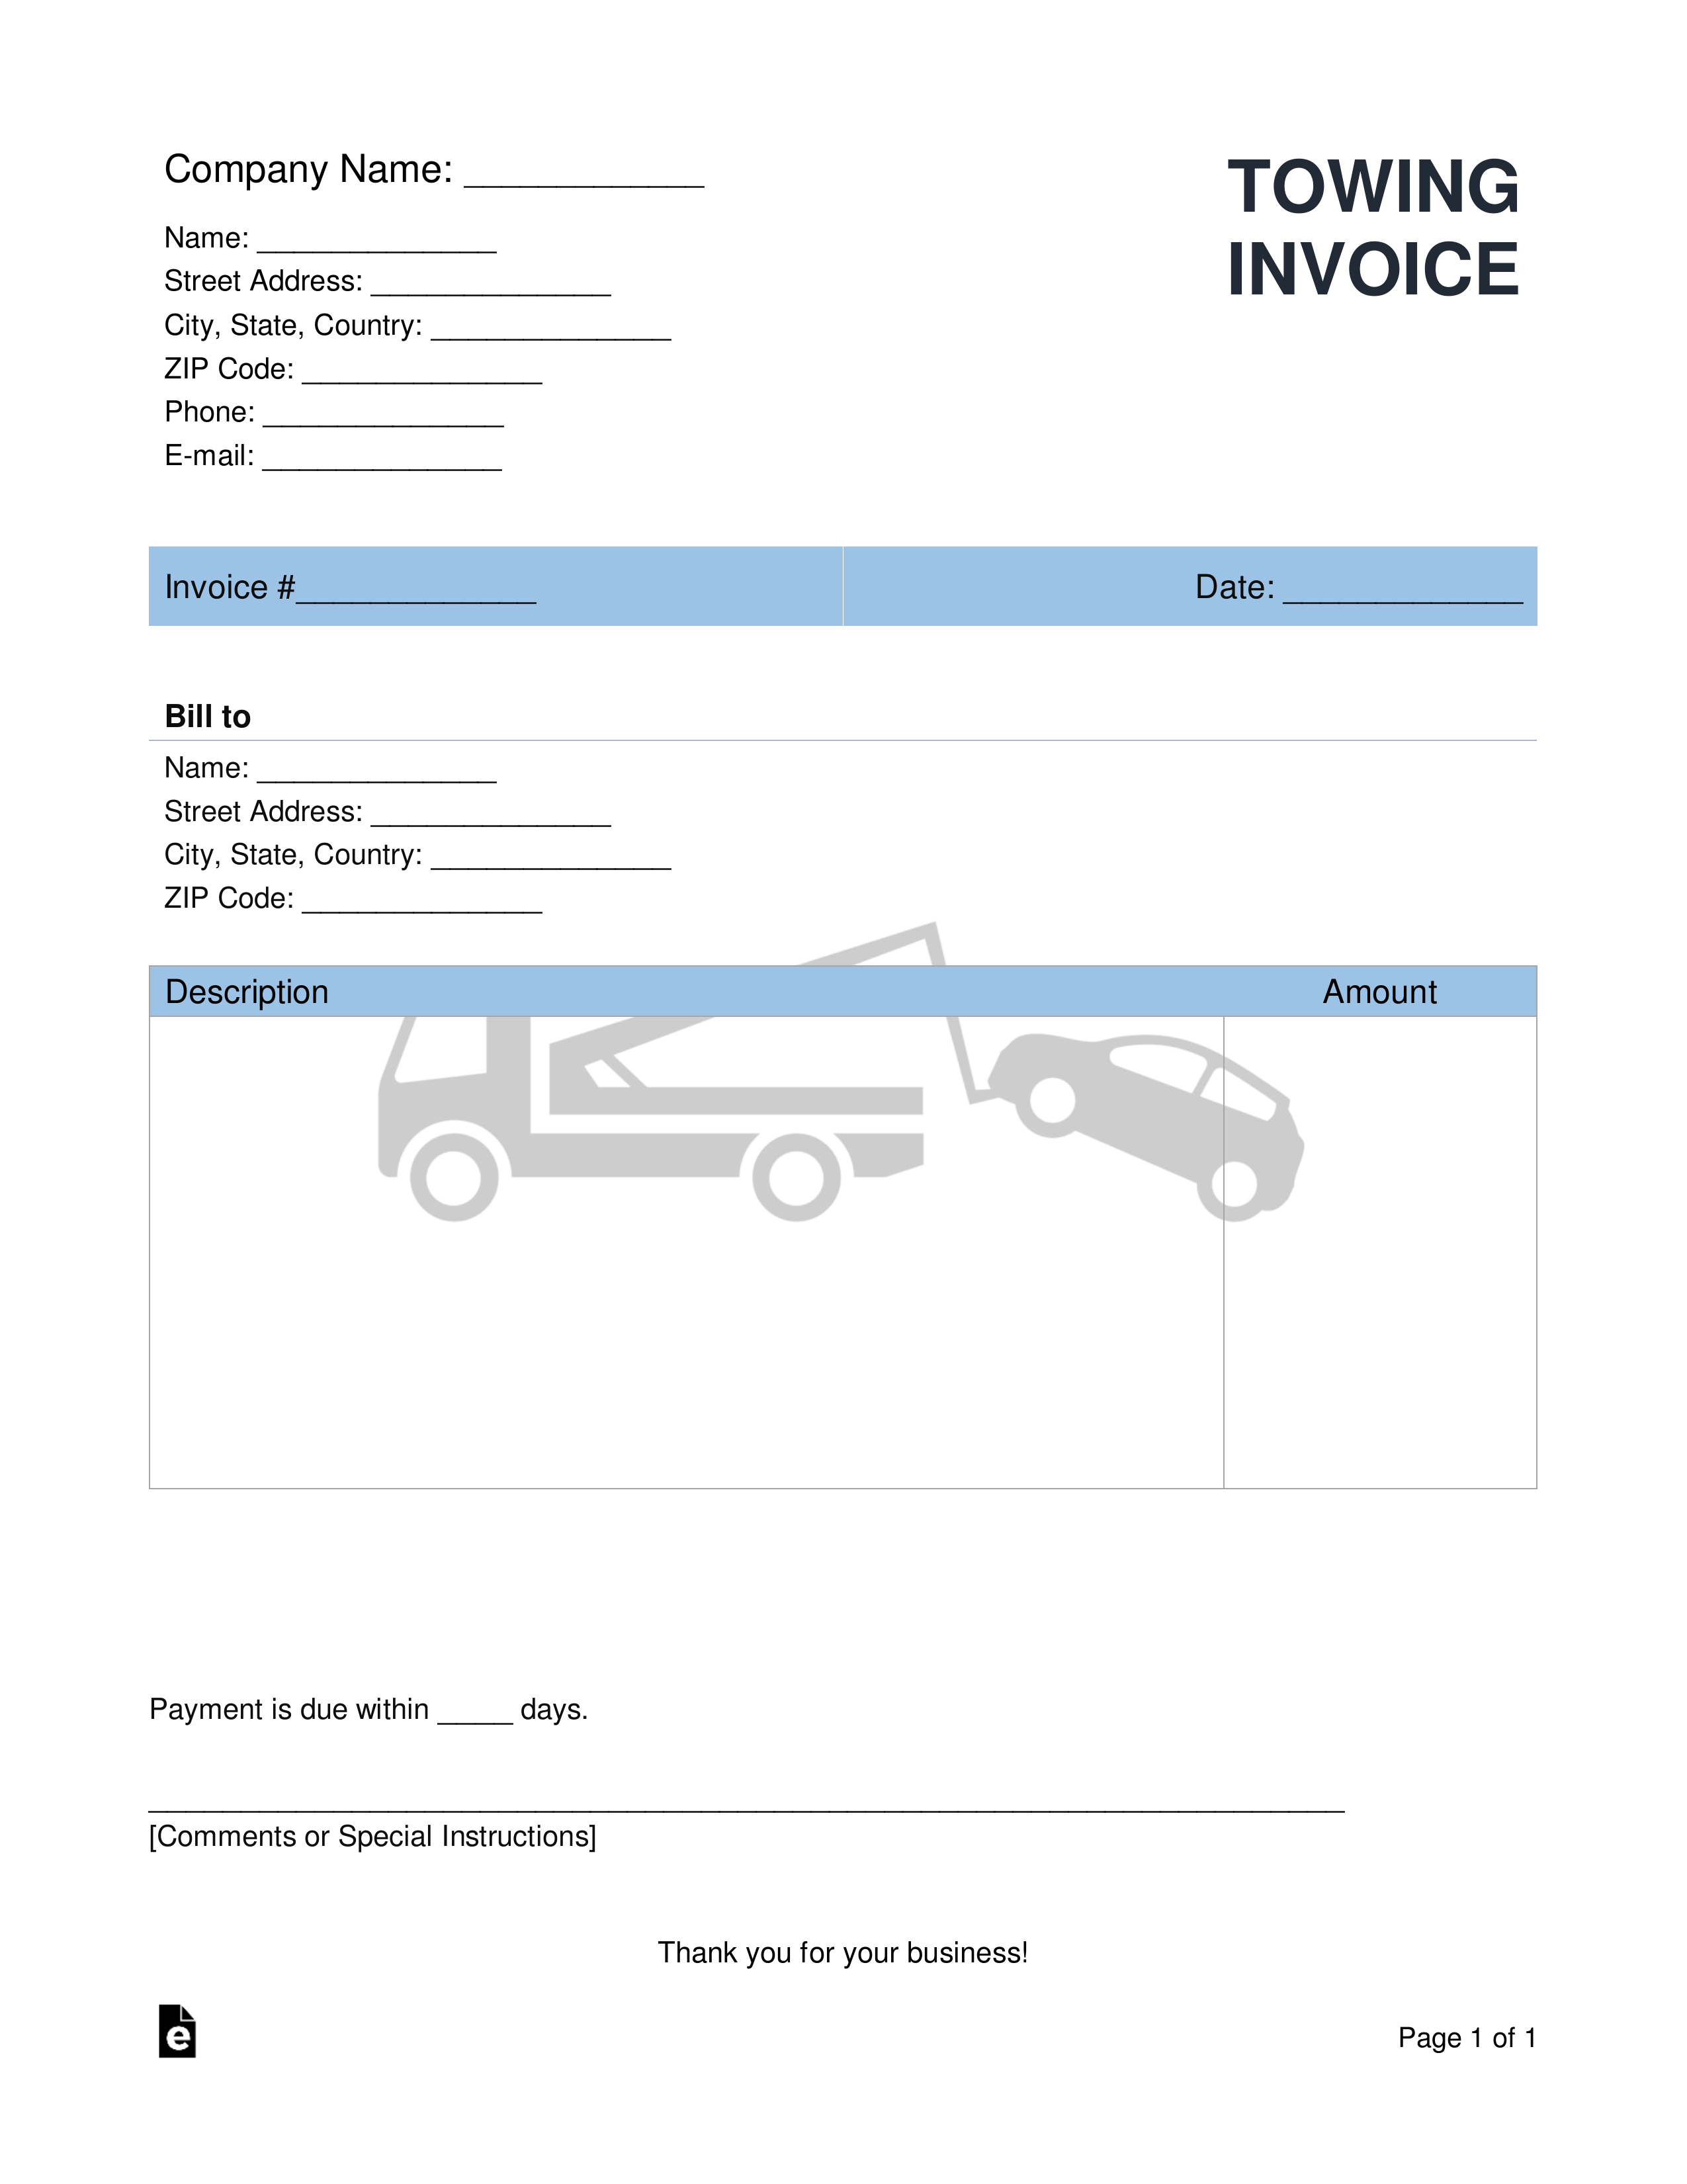 Free Towing Company Invoice Template - PDF | Word | eForms – Free